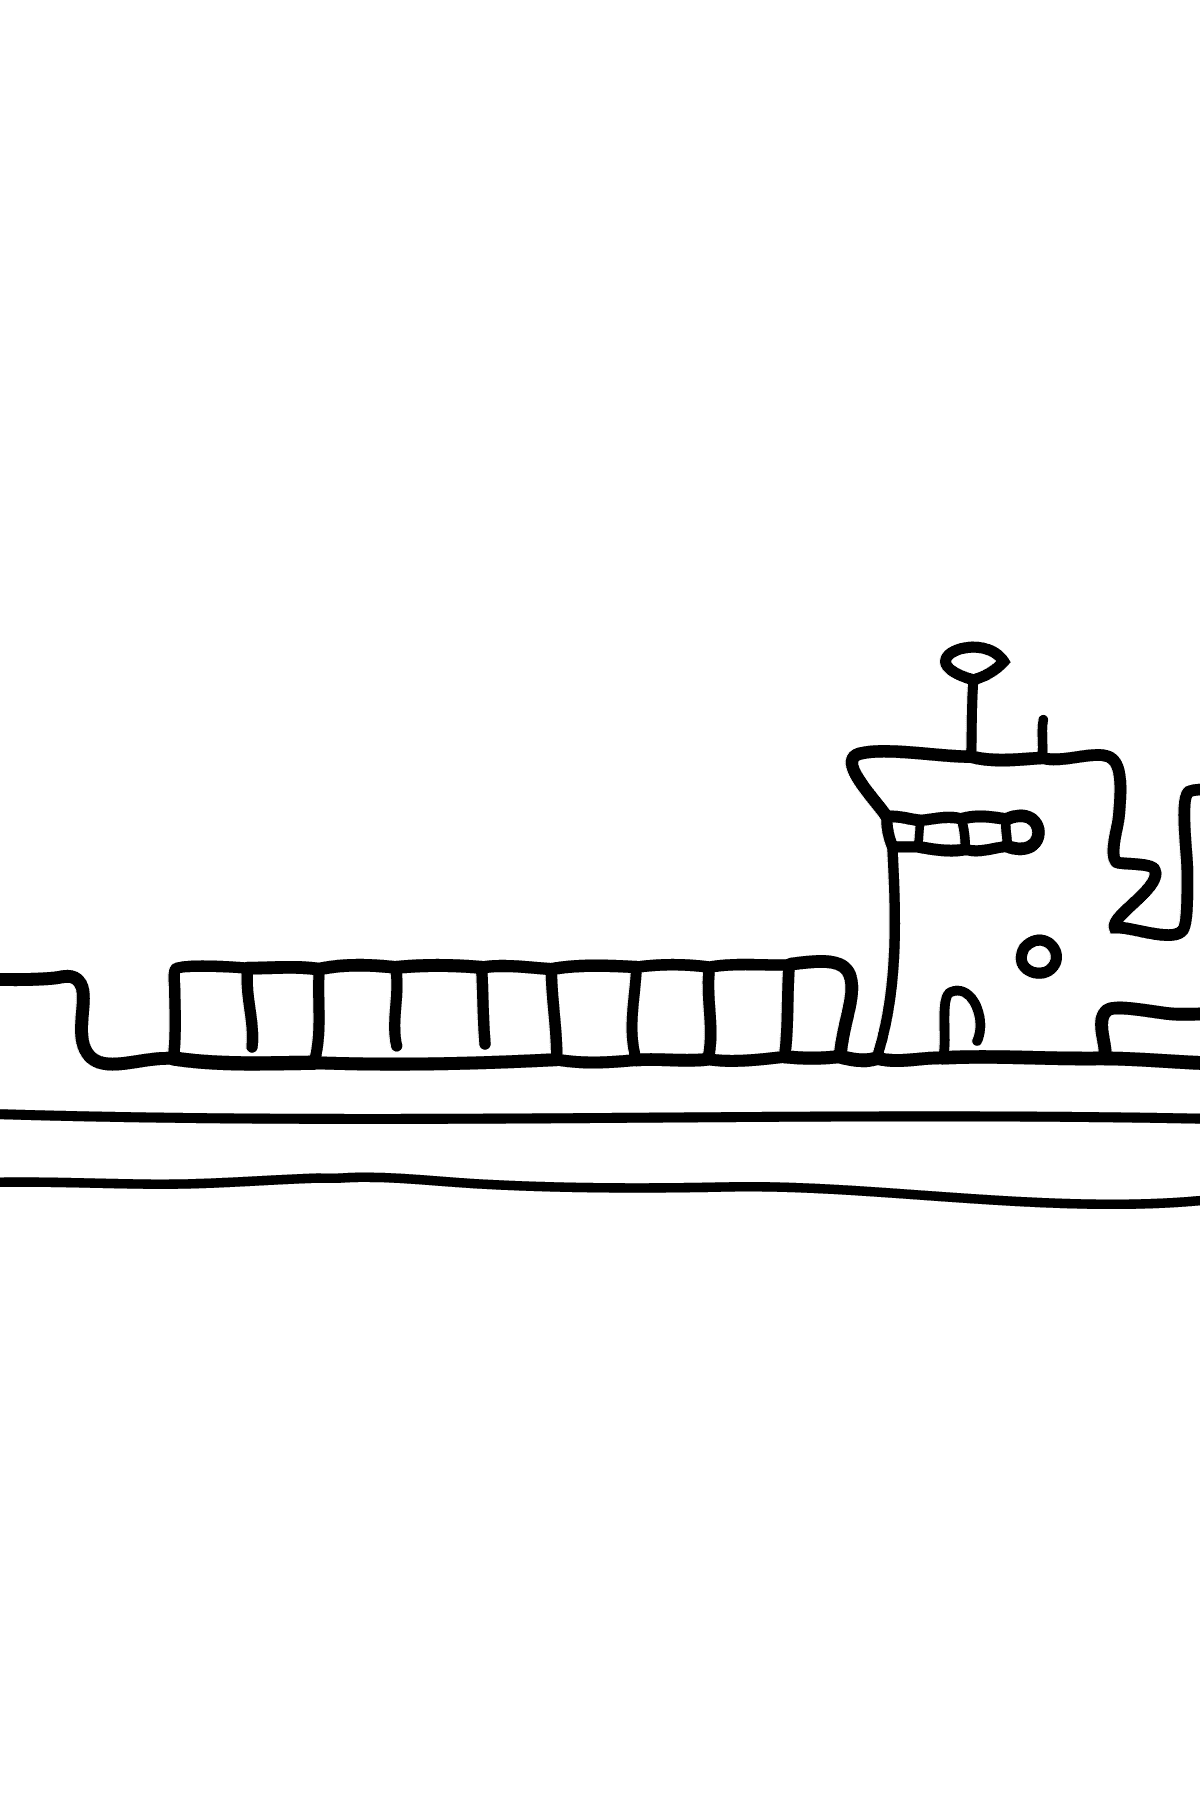 Coloring Page - A Dry Cargo Barge - Coloring Pages for Children